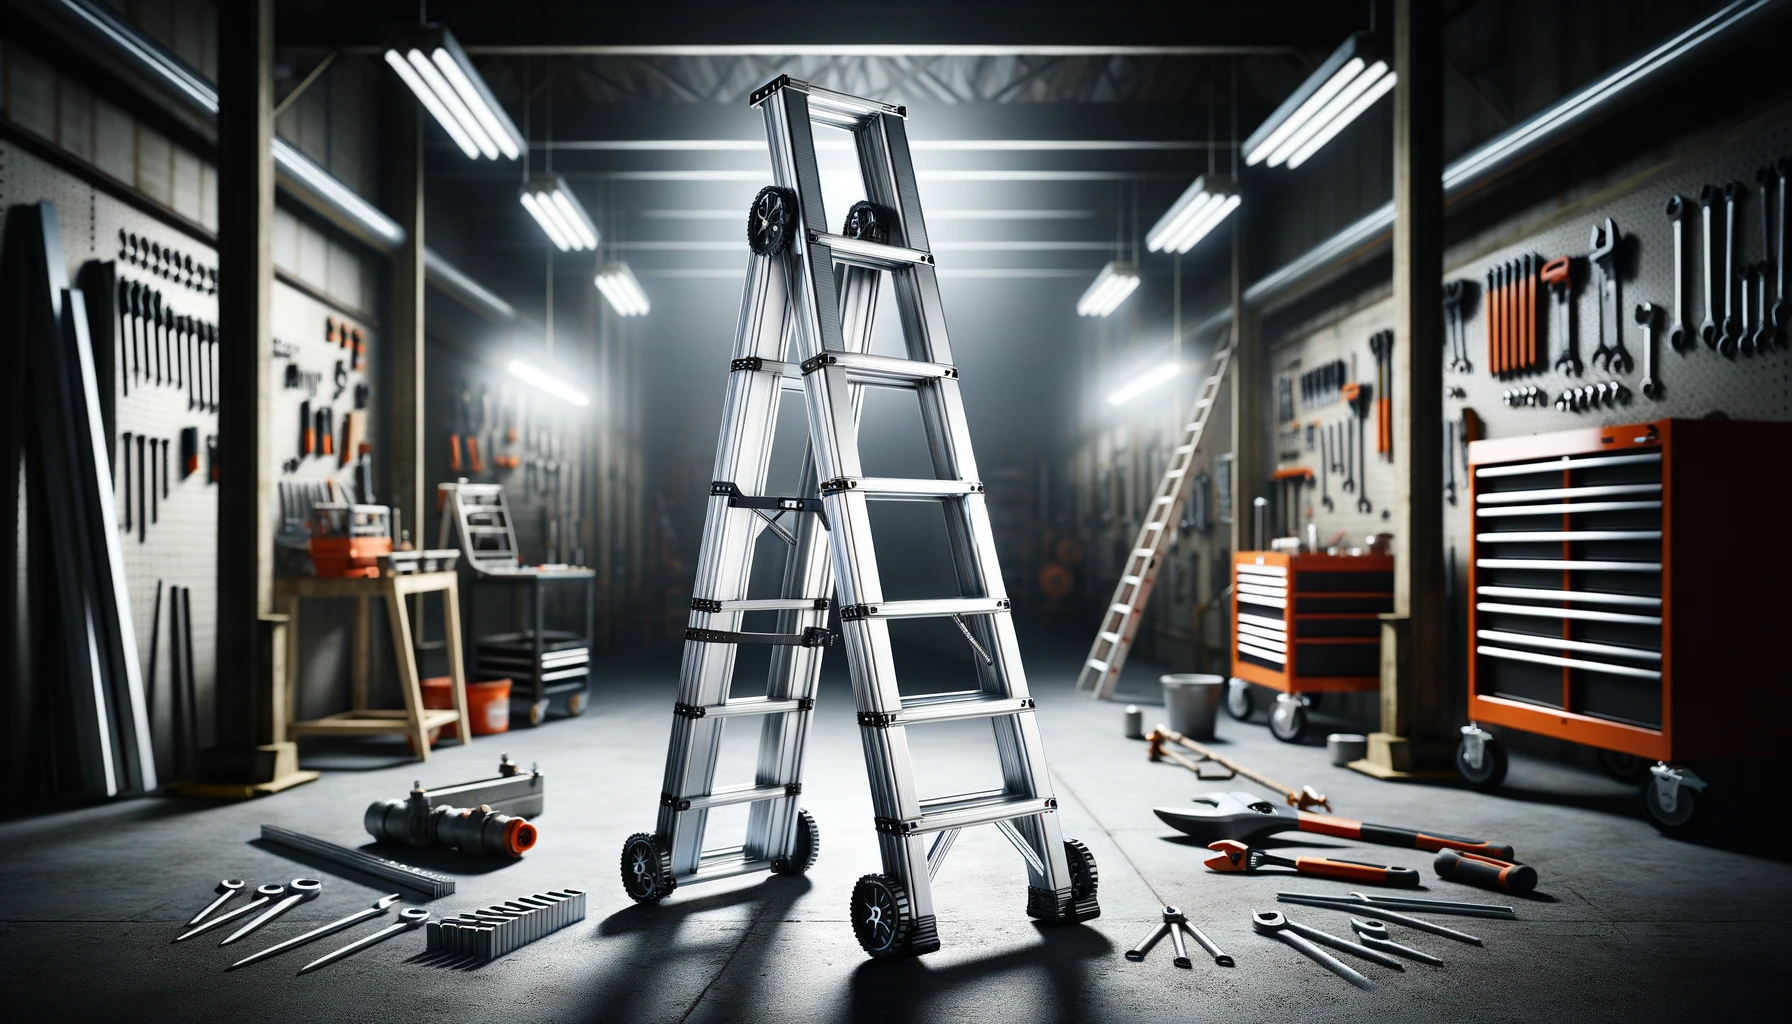 Dall·e 2024 05 07 23.36.59 A Single Image Showcasing A Versatile Aluminum Ladder In A Professional Setting. The Ladder Should Be An Extension Model, Prominently Displayed In An